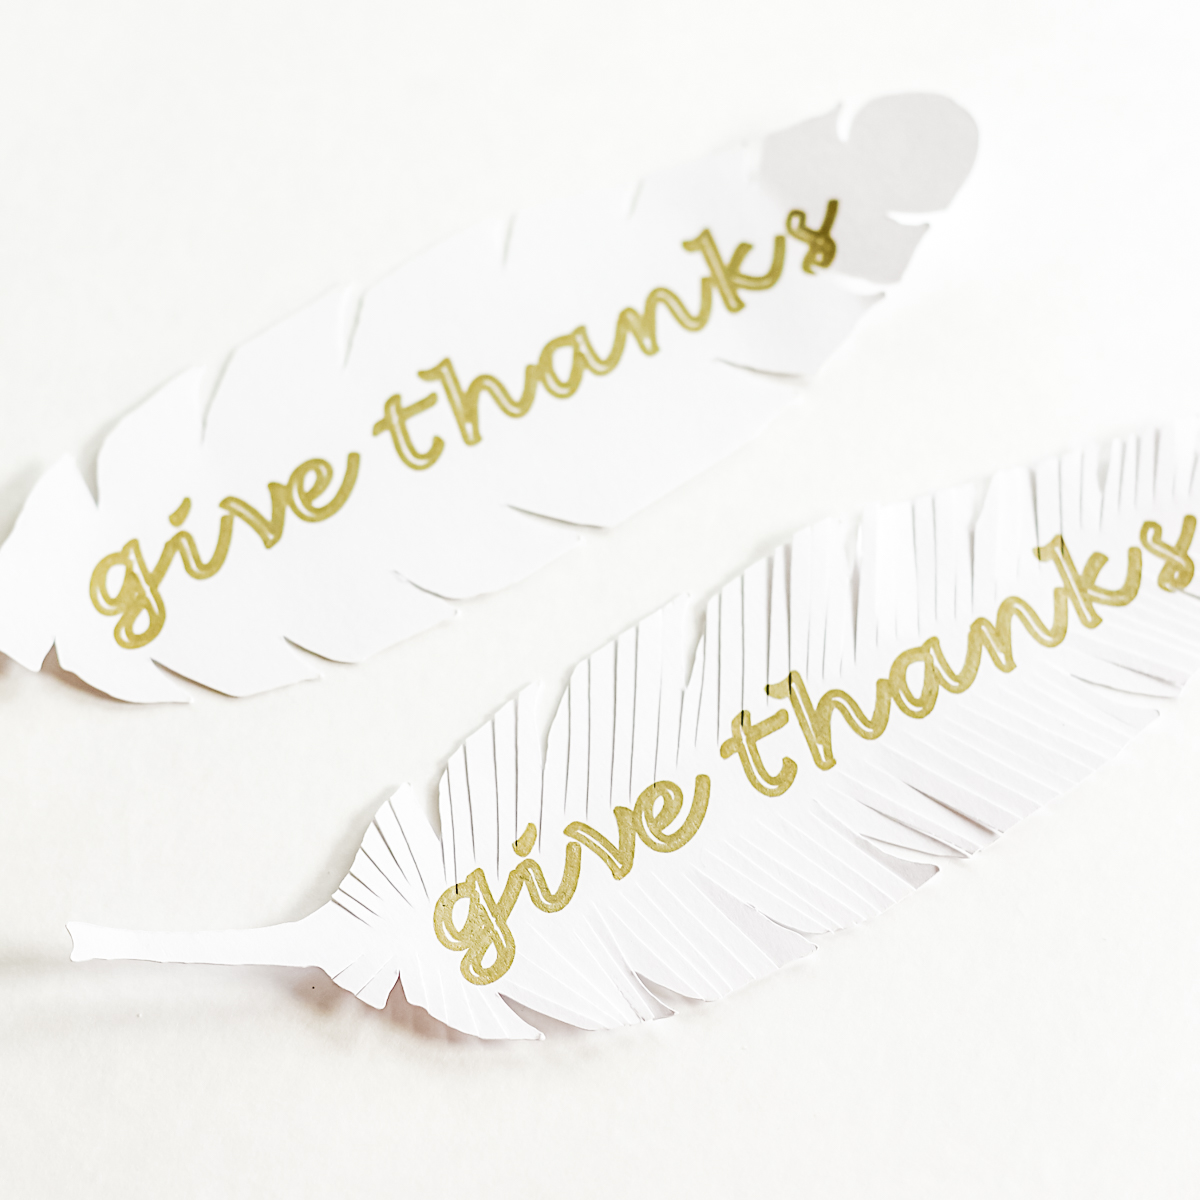 paper feathers with writing on them